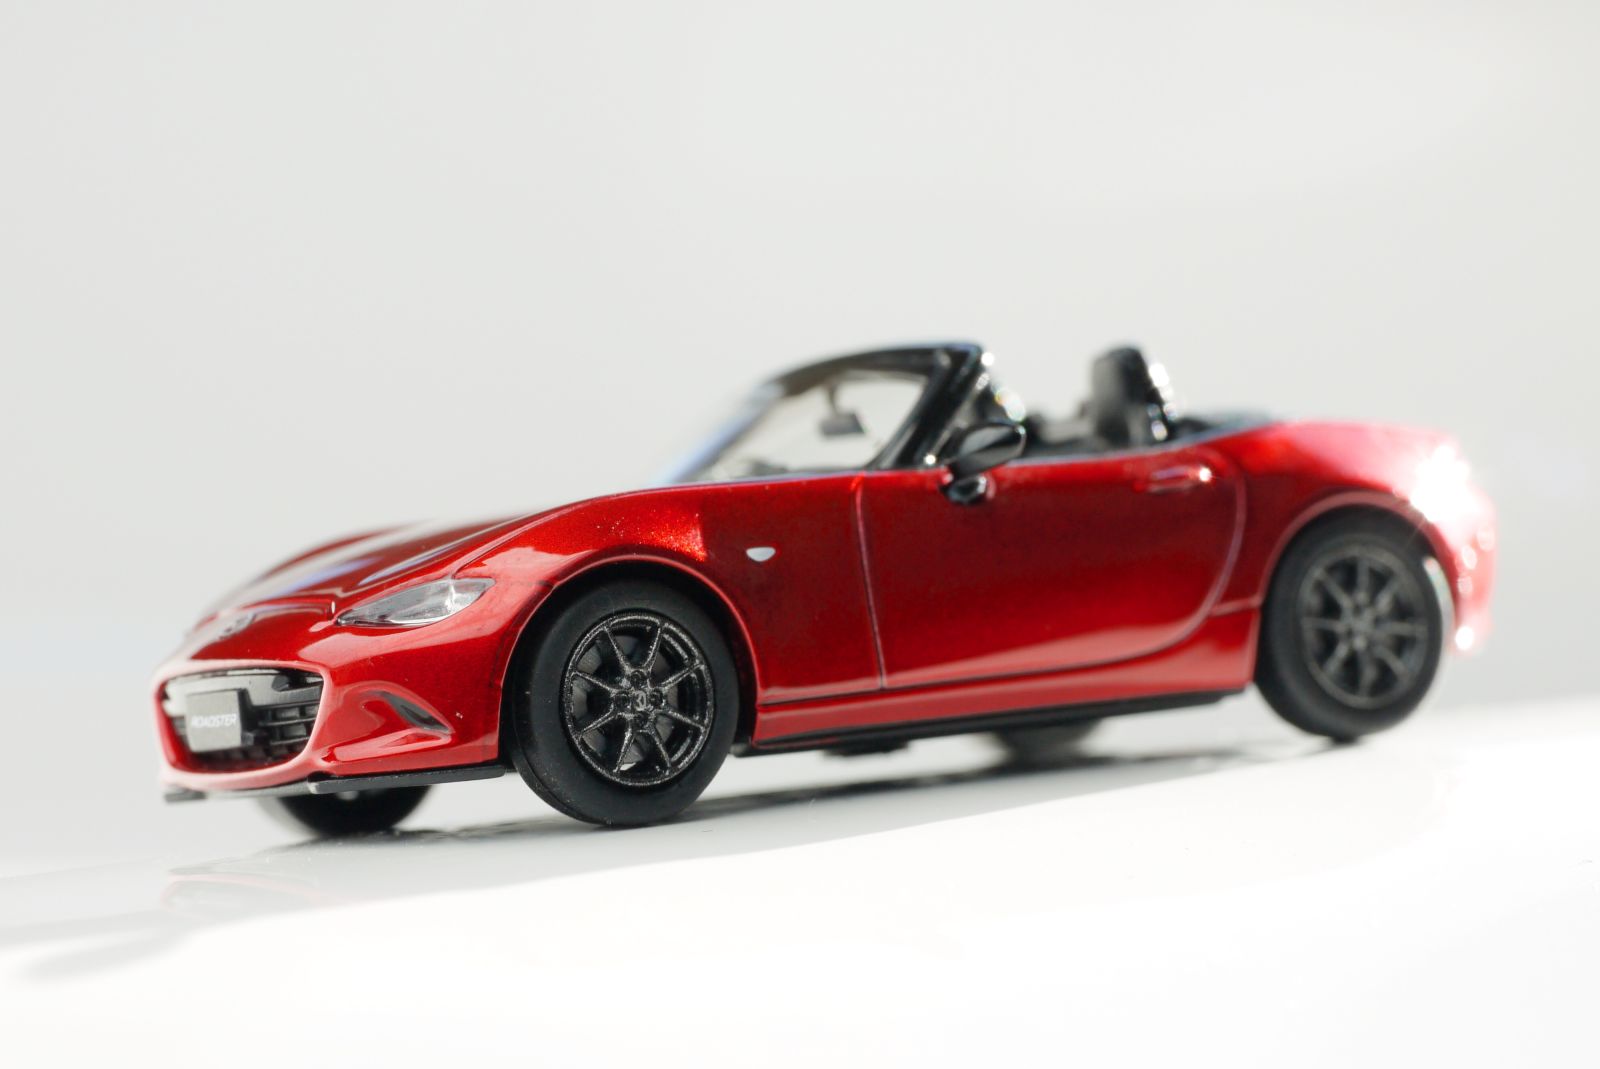 Illustration for article titled Oversteer 1/64 #1 - Project Zoom Zoom #1 - Mazda Roadster miata